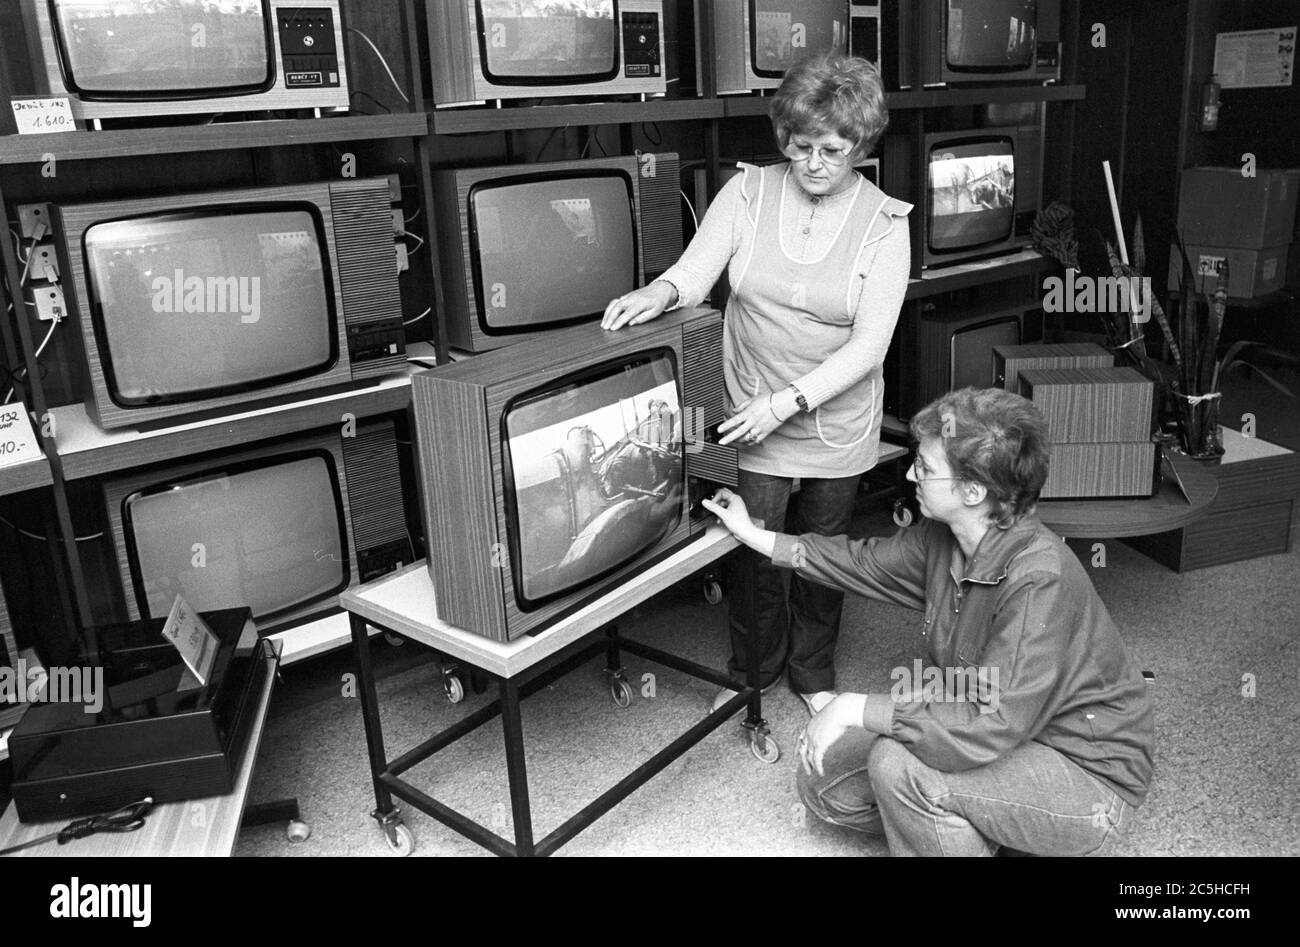 30 November 1988, Saxony, Eilenburg: In a RFT shop in Eilenburg in the mid-1980s, sales assistants (buyers) inspect a used television set and prepare it for resale. Exact date of recording not known. Photo: Volkmar Heinz/dpa-Zentralbild/ZB Stock Photo